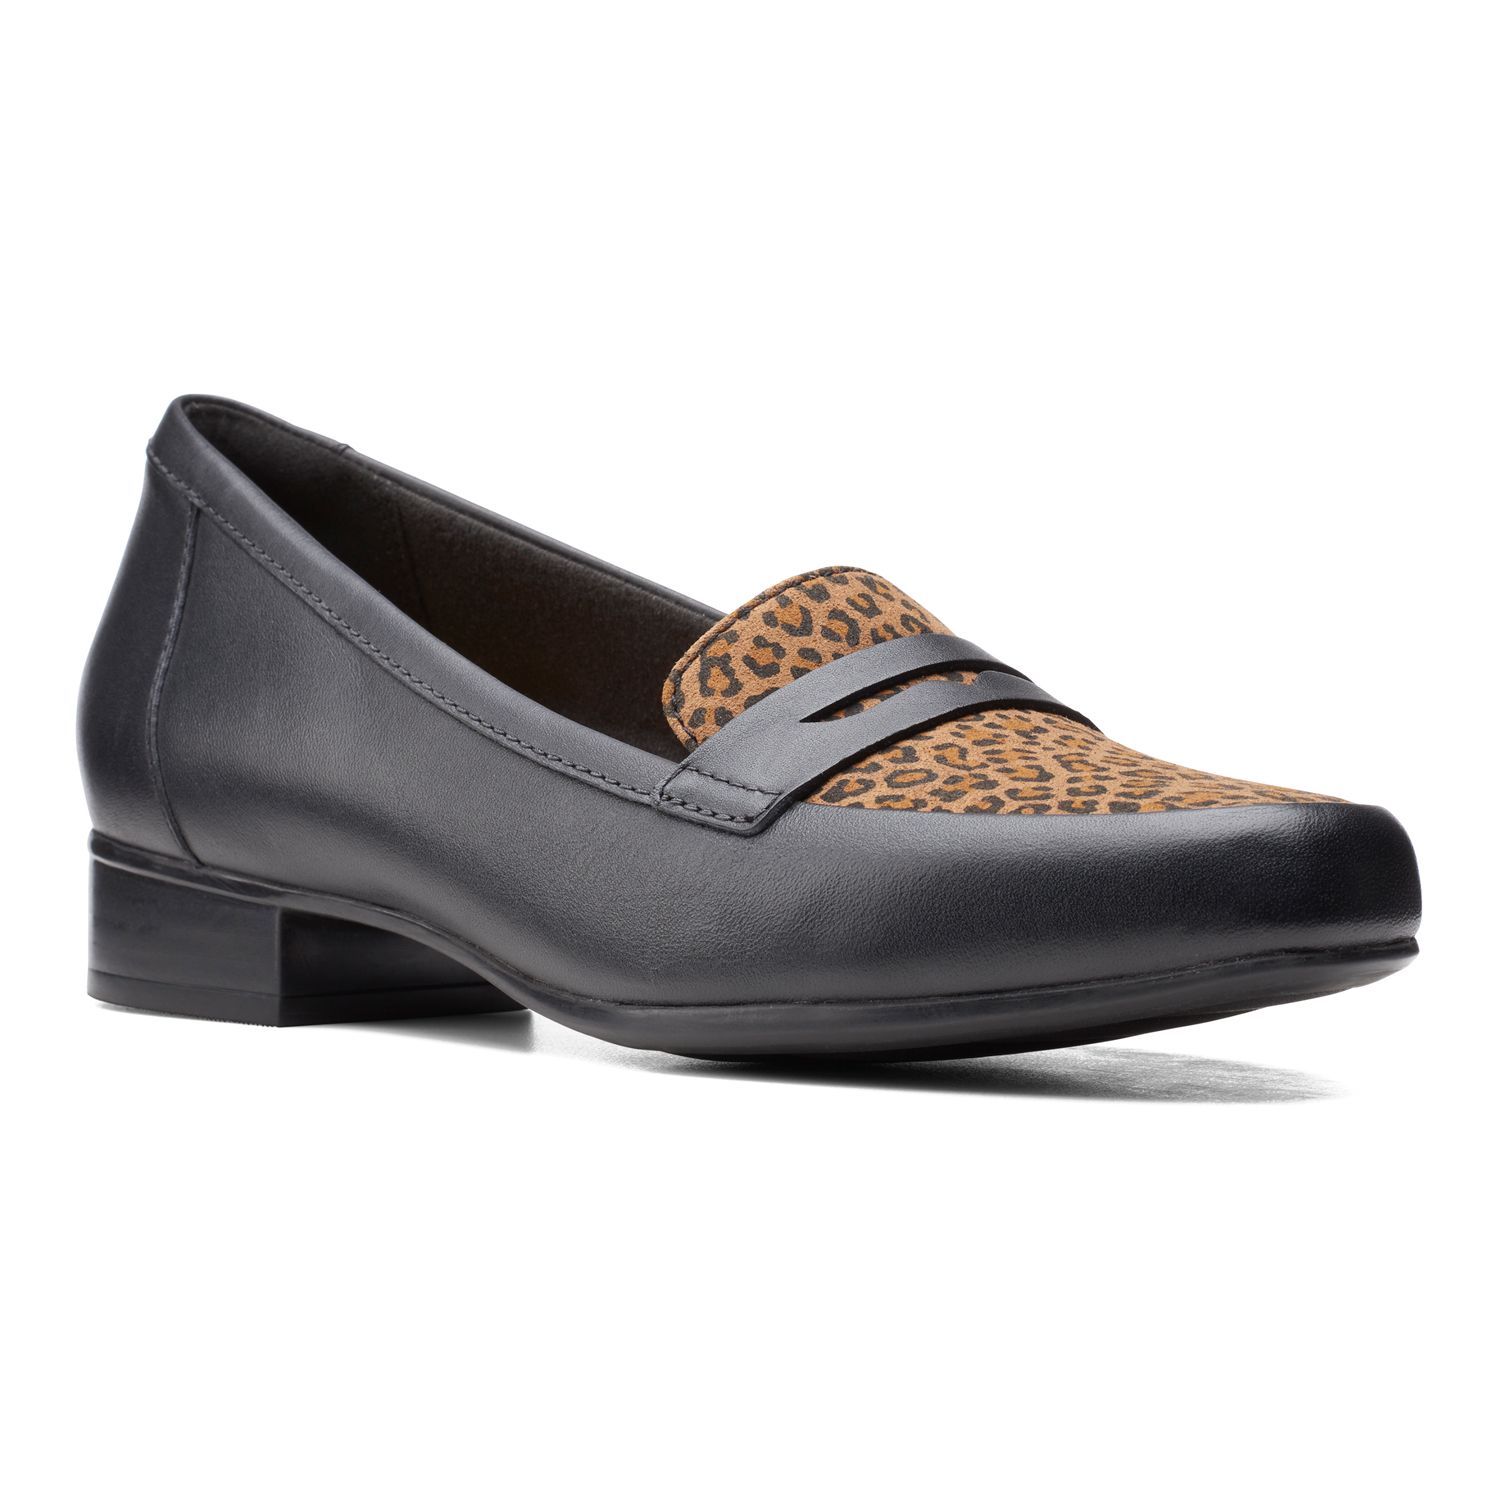 clarks womens shoes at kohls